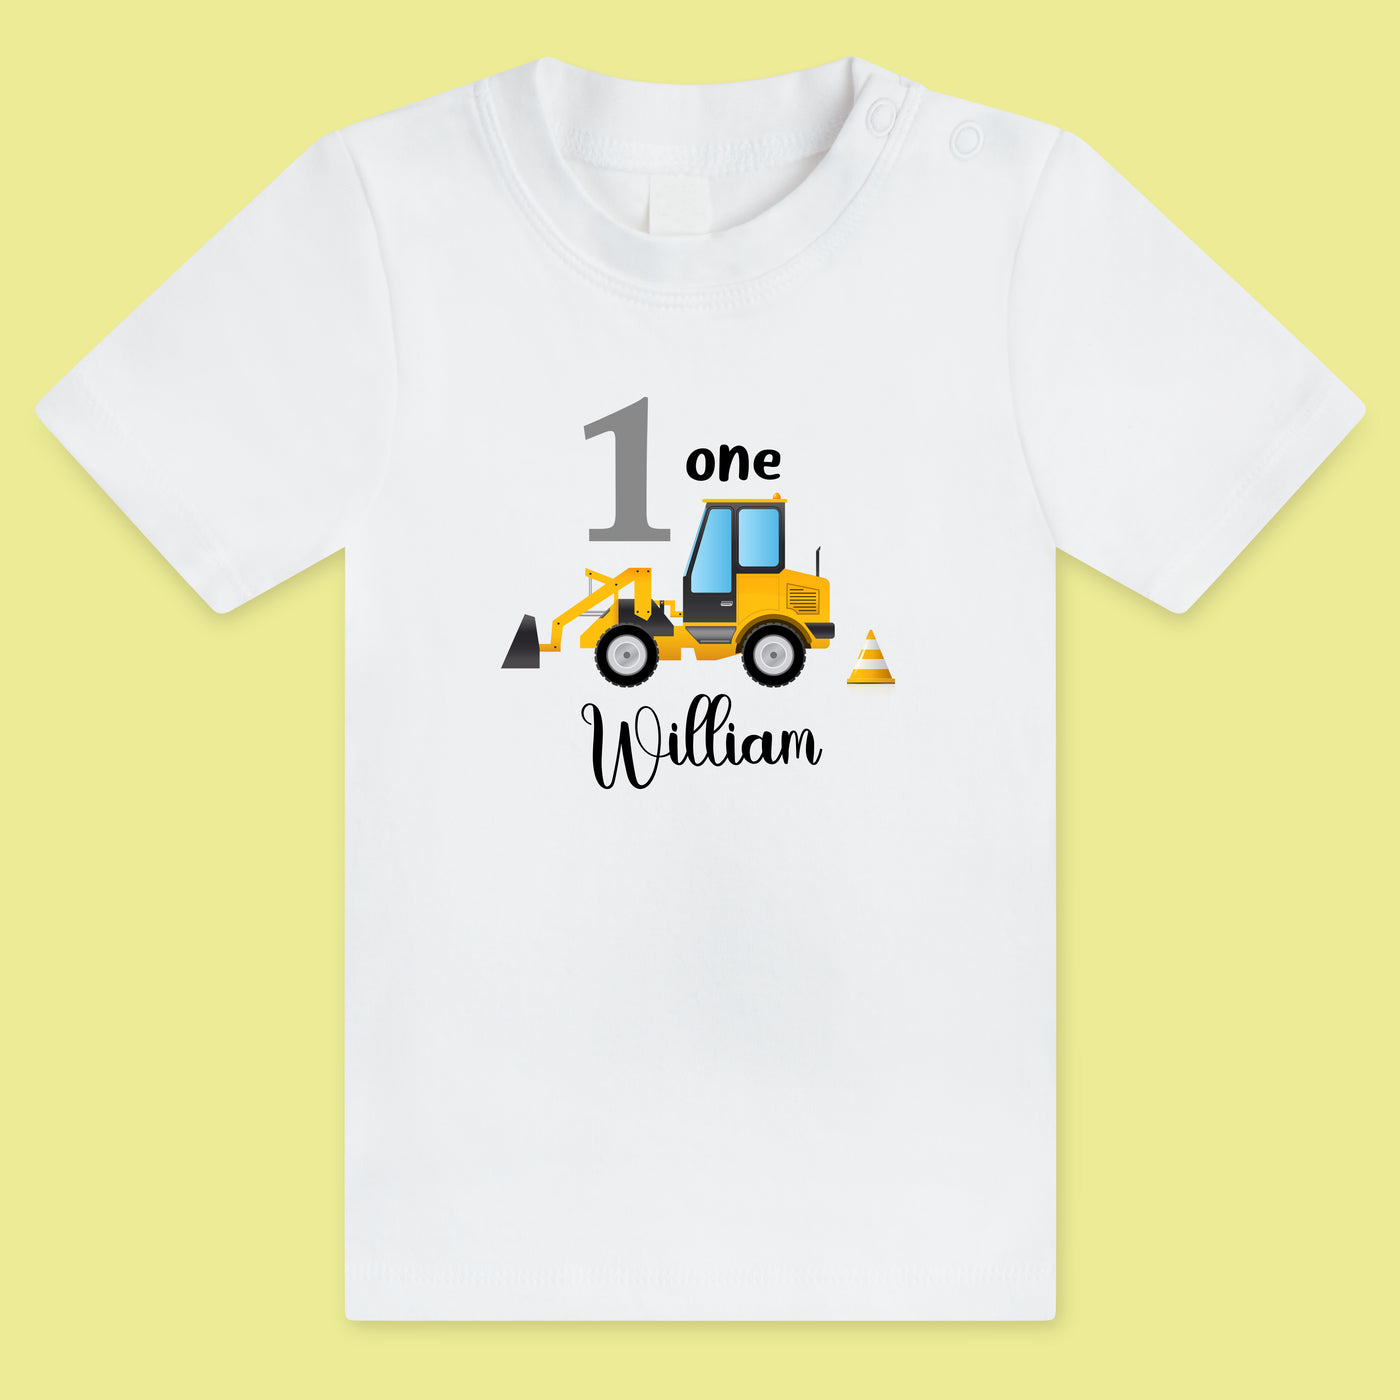 KID'S BIRTHDAY DIGIT T-SHIRT WITH VEHICLE STYLE 1